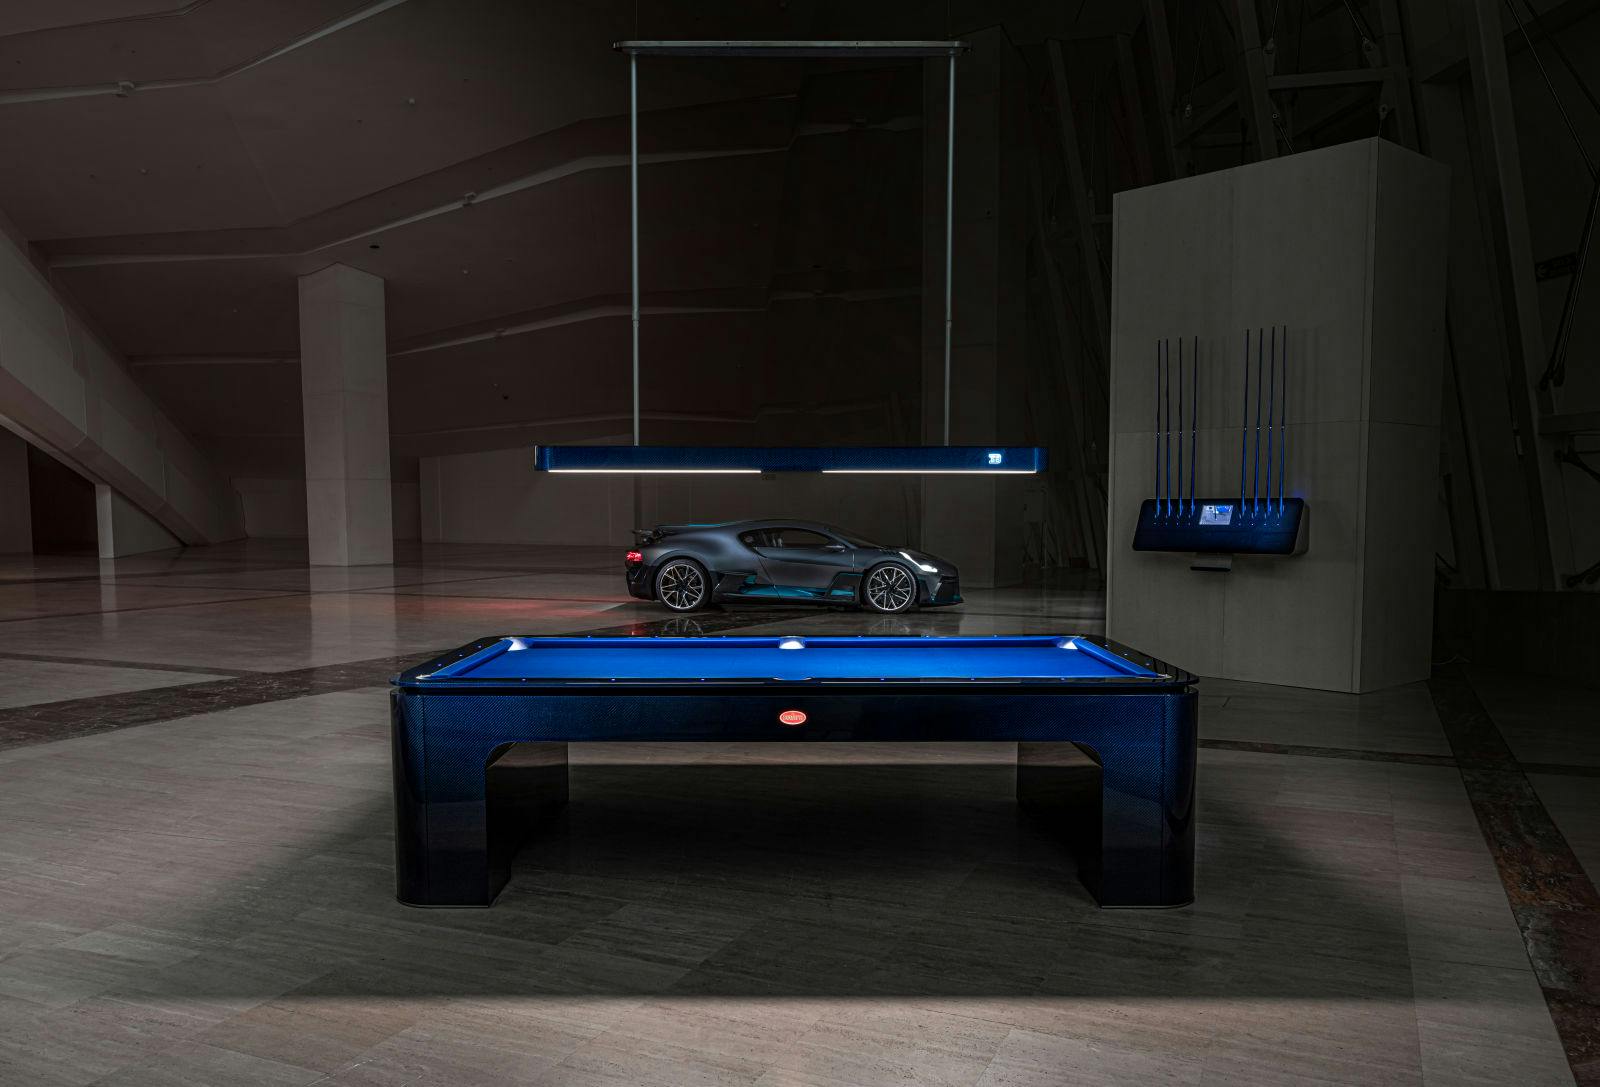 The Bugatti Pool Table – a true embodiment of the French luxury brand